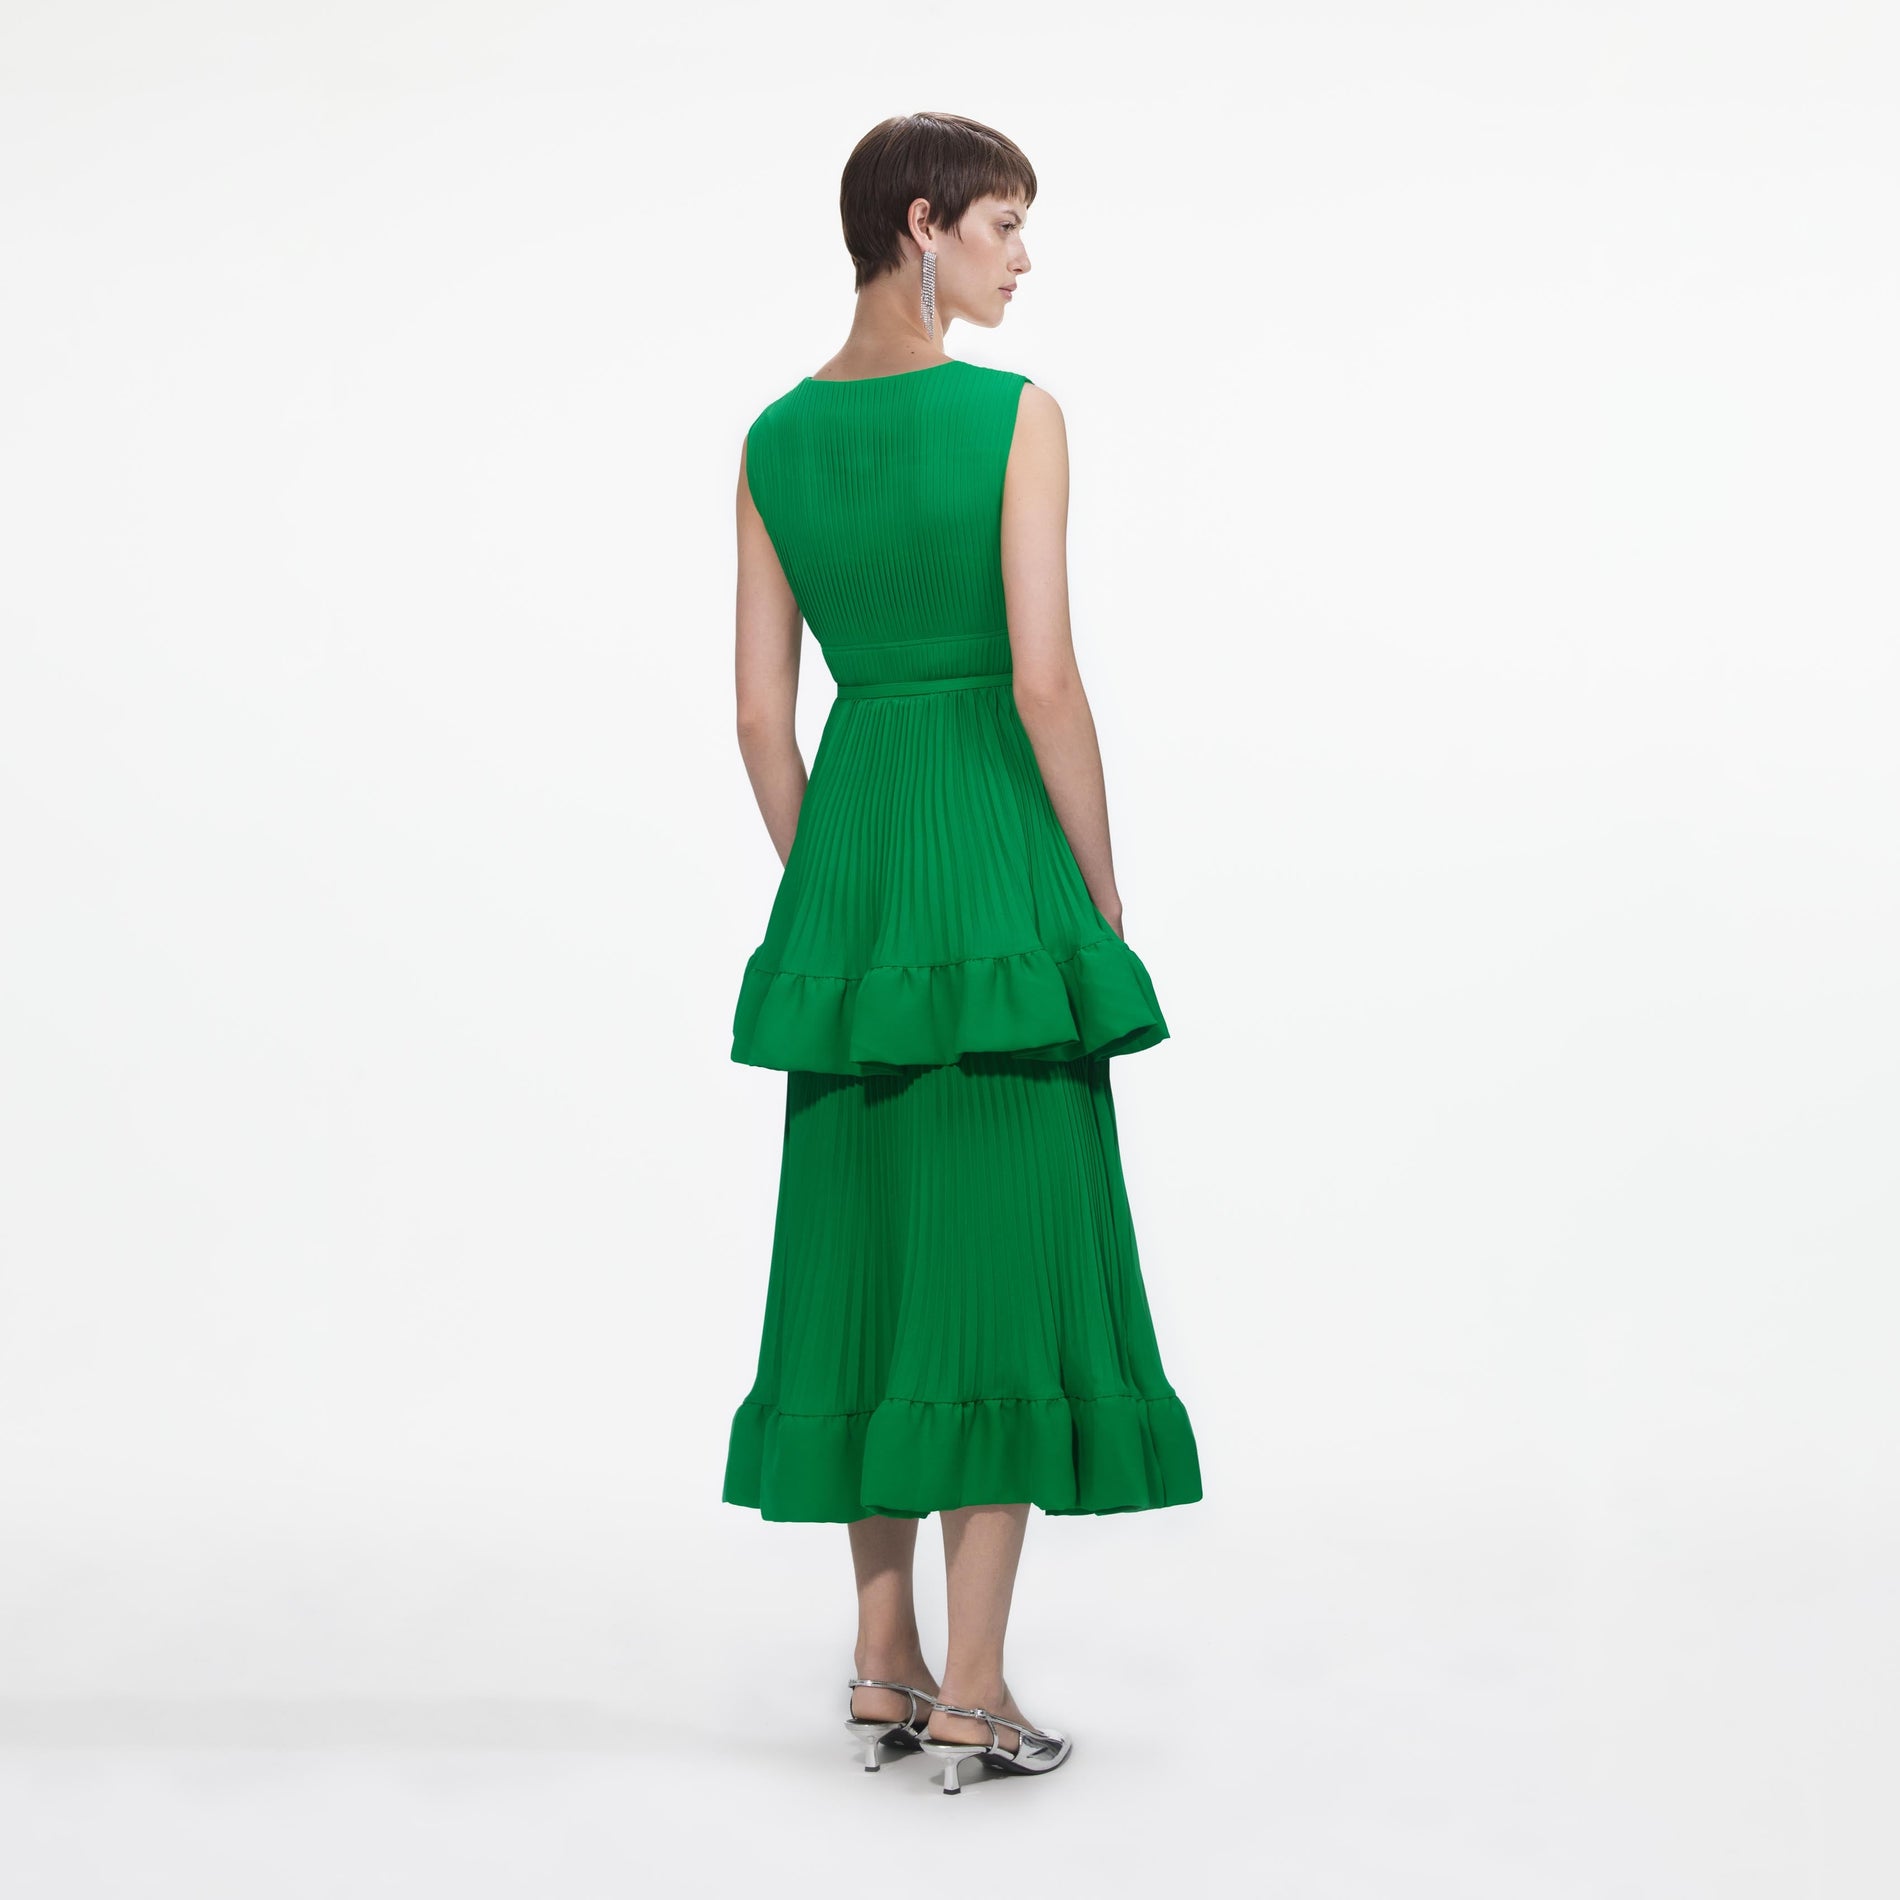 Back view of a woman wearing the White Green Tiered Satin Midi Dress